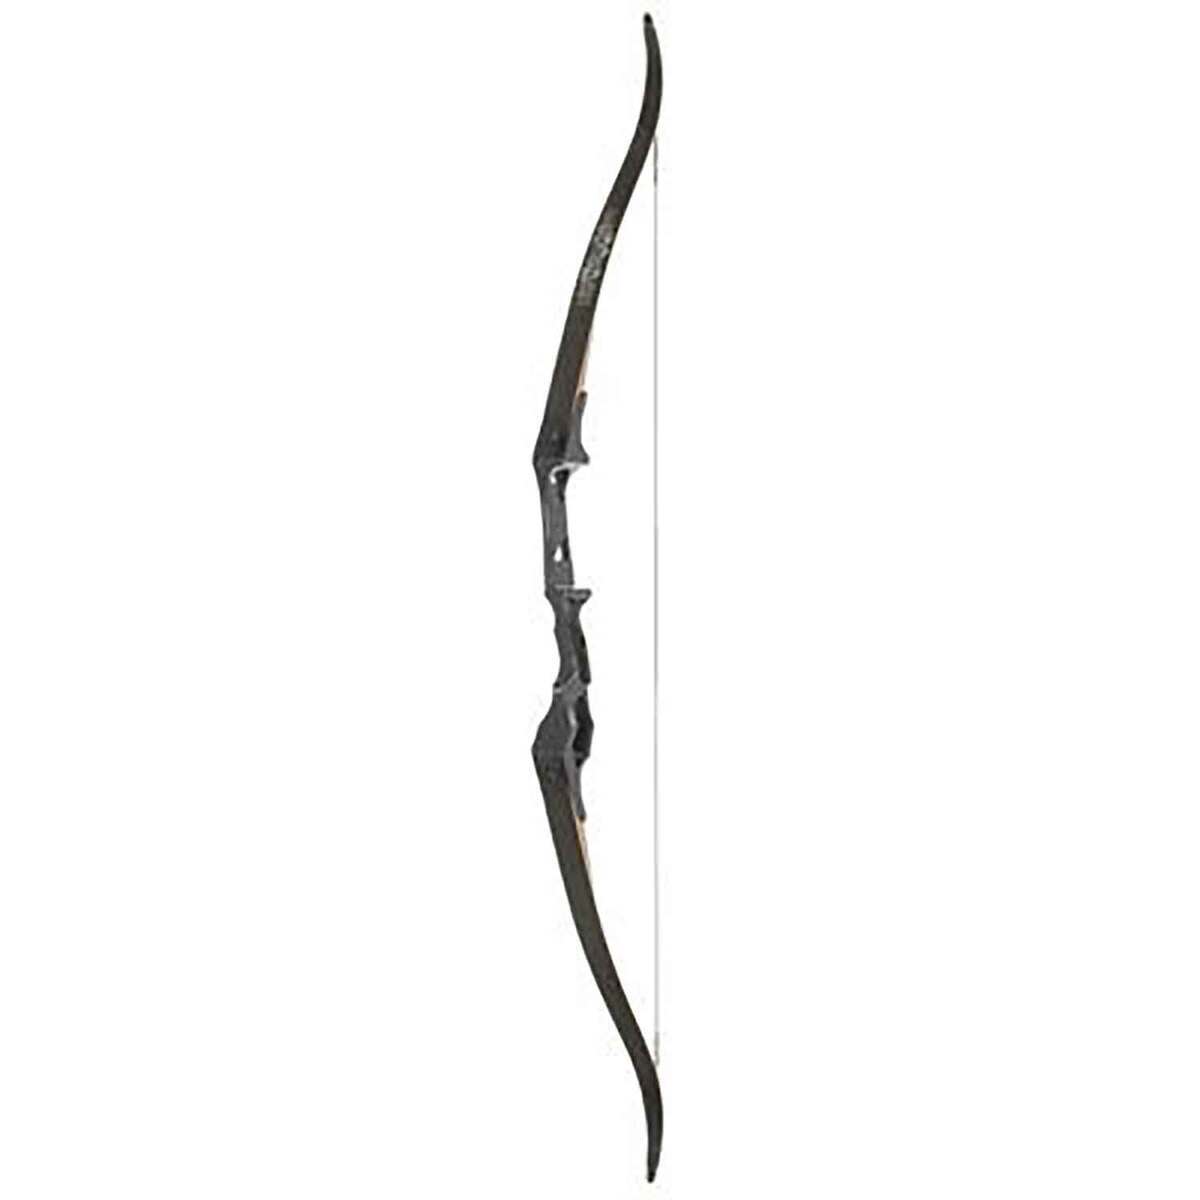 Fin-Finder Bank Runner 35lbs Right Hand Black Traditional Recurve